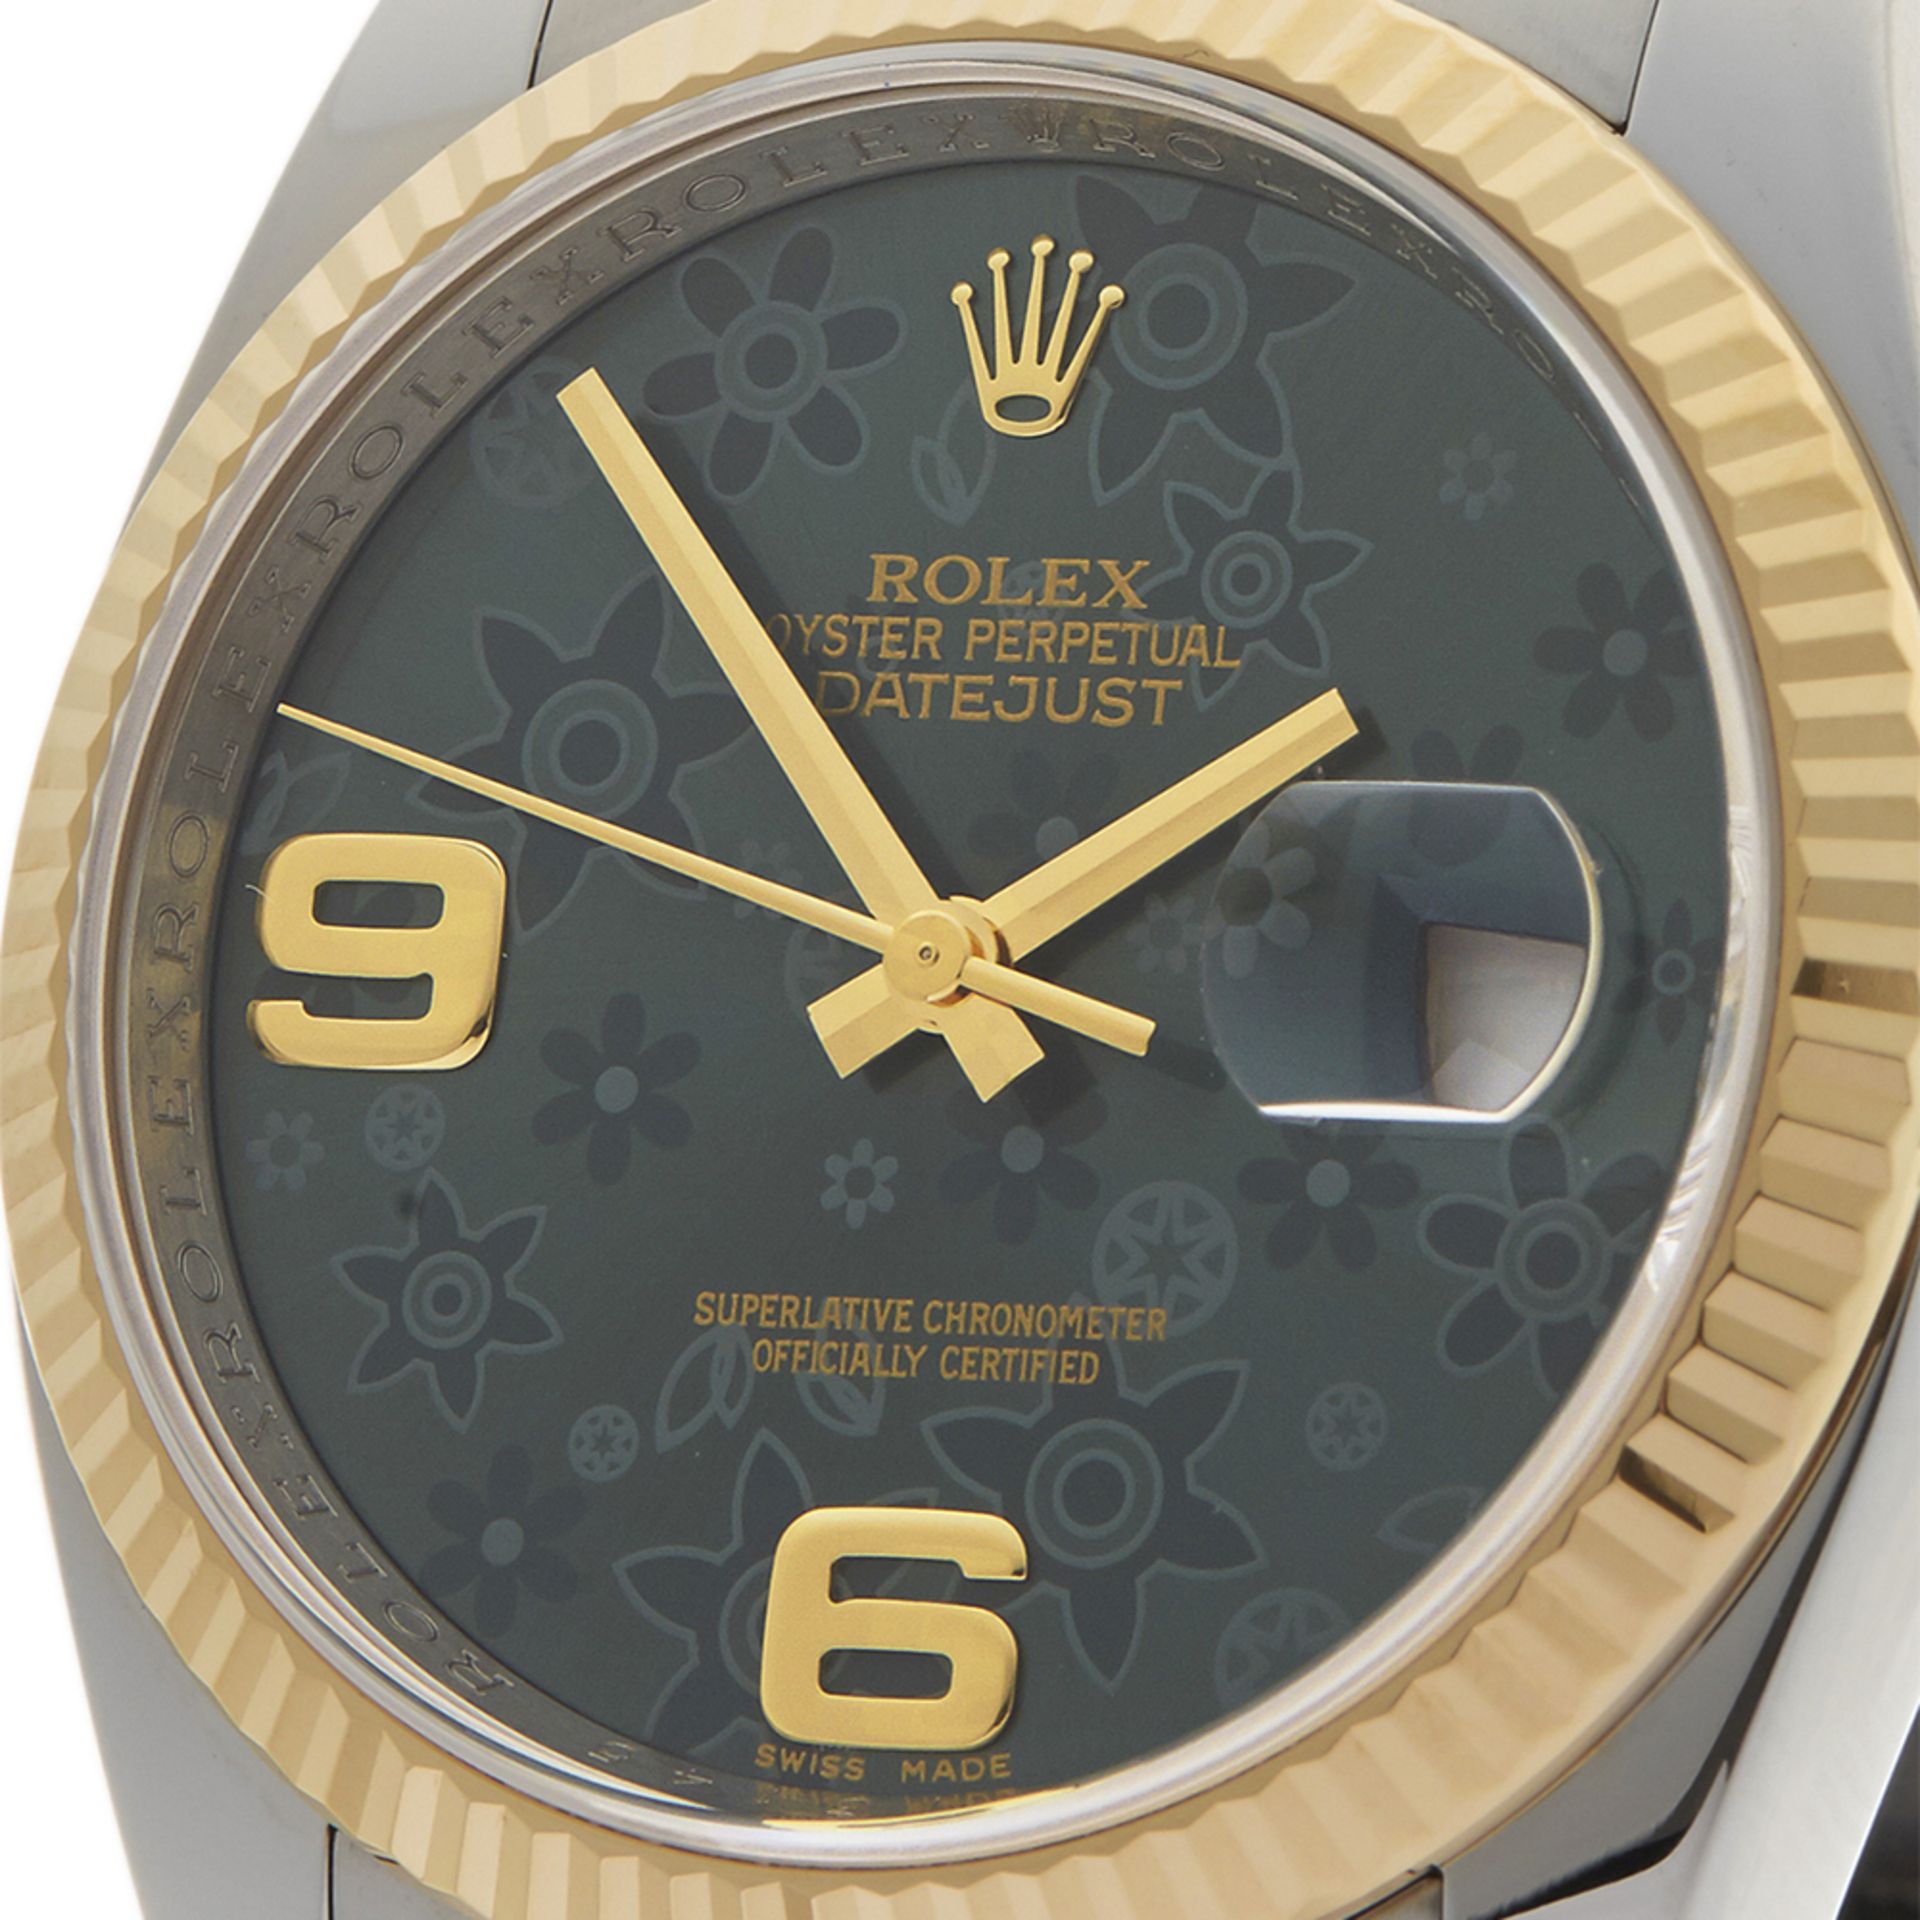 Rolex Datejust 36mm Stainless Steel & 18k Yellow Gold - 116233